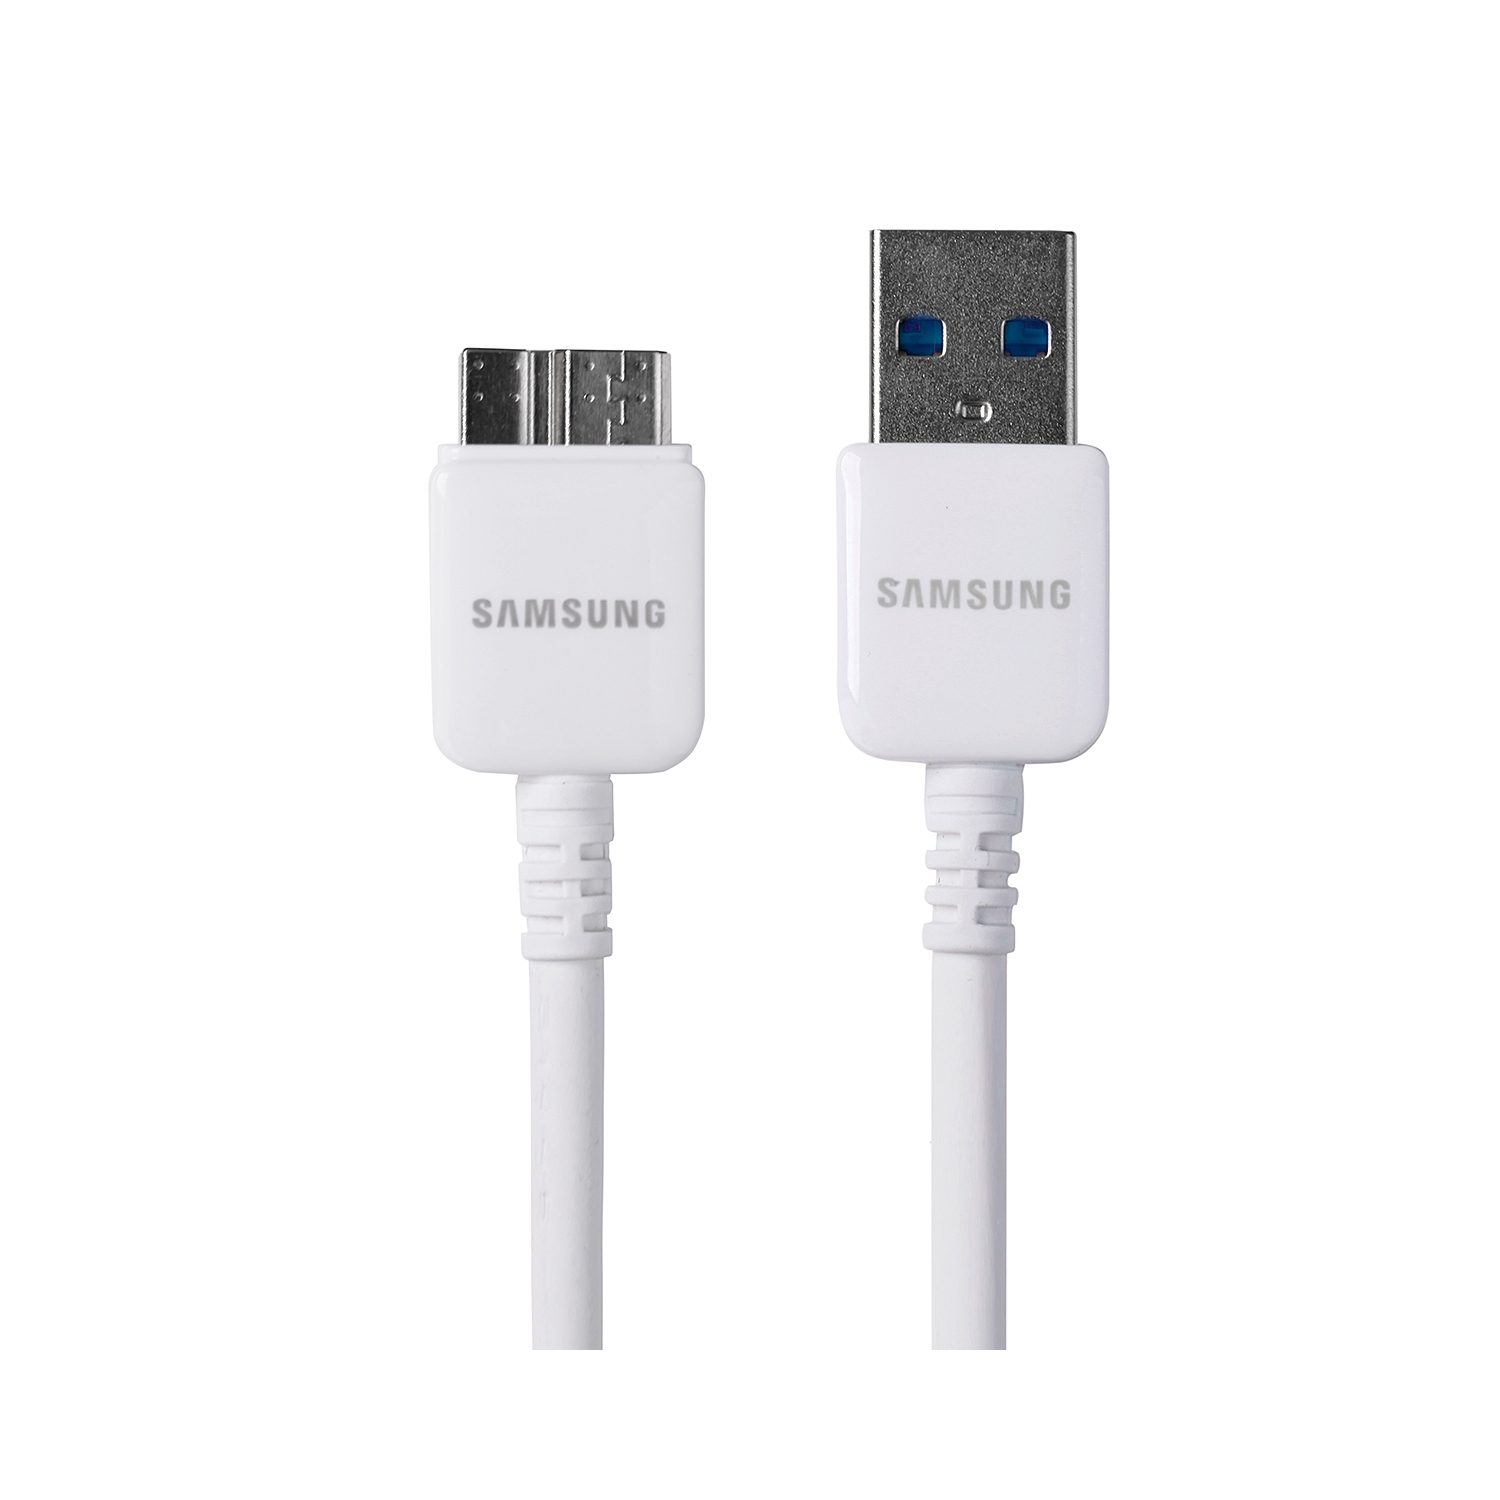 Fast Quick Charging MicroUSB Cable works with Samsung Samsung Galaxy Tab 3 7-inch is 5ft/1.5M allows fast charging Speeds!